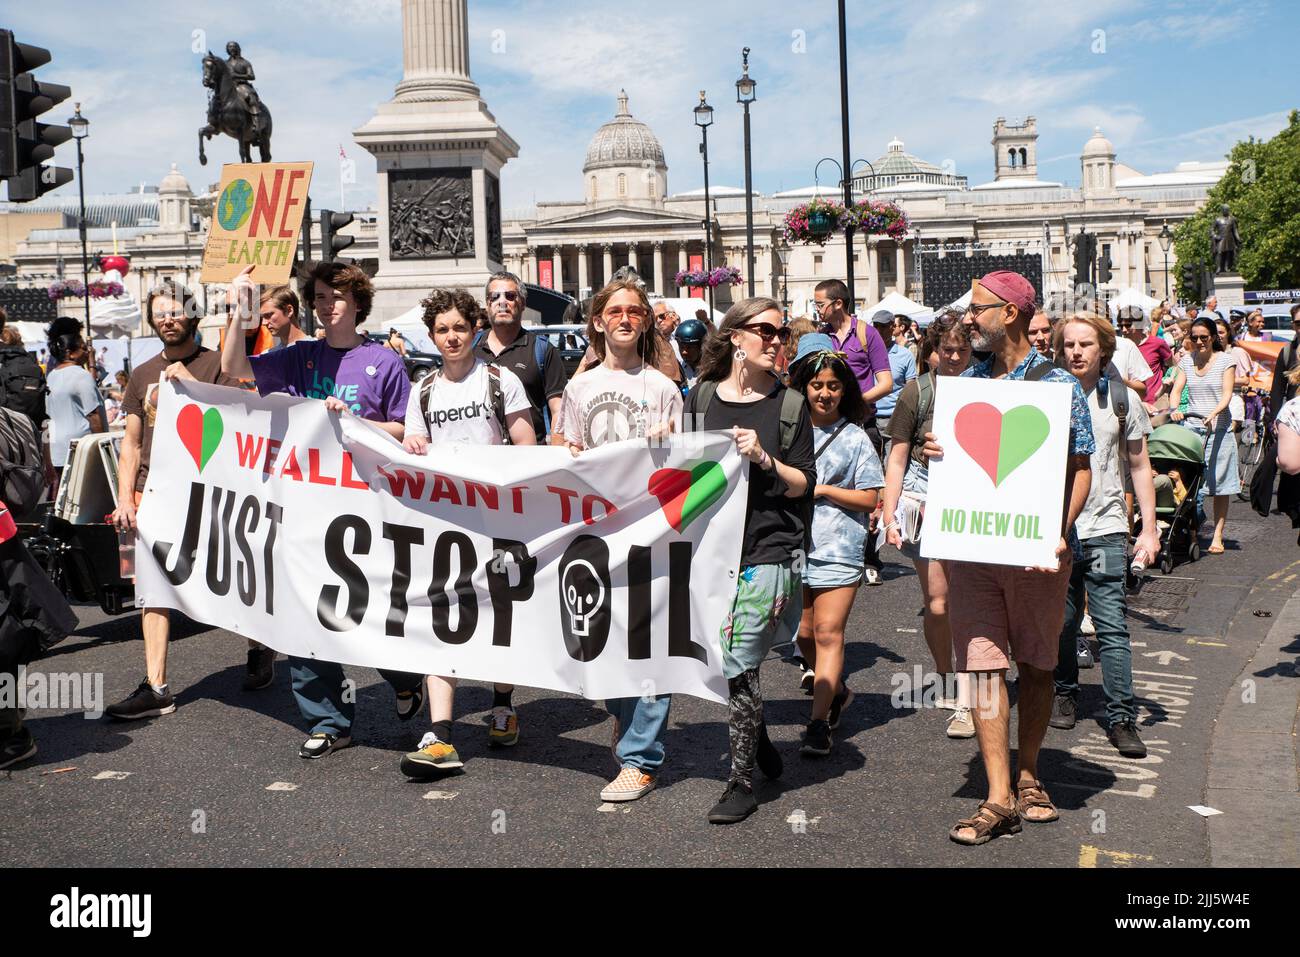 London, UK. 23rd July 2022. We All Want To Just Stop Oil Coalition: National March & Sit Down. One of many marches converging upon Westminster. March passing Trafalgar Square.  Credit: Stephen Bell/Alamy Live News Stock Photo